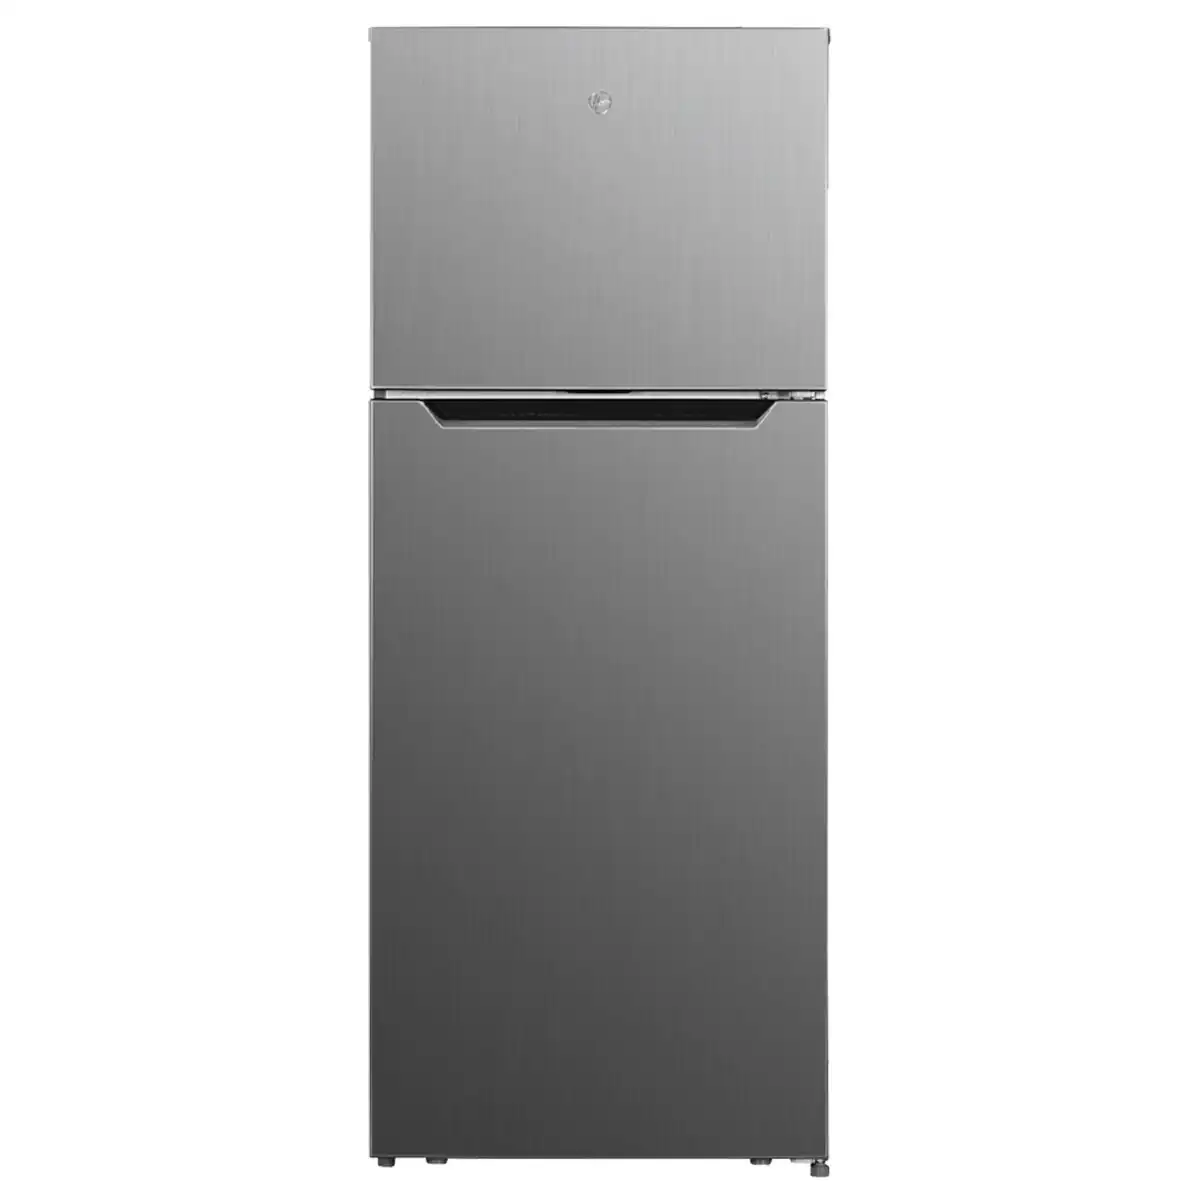 Hoover 415L Top Mount Refrigerator Stainless Steel